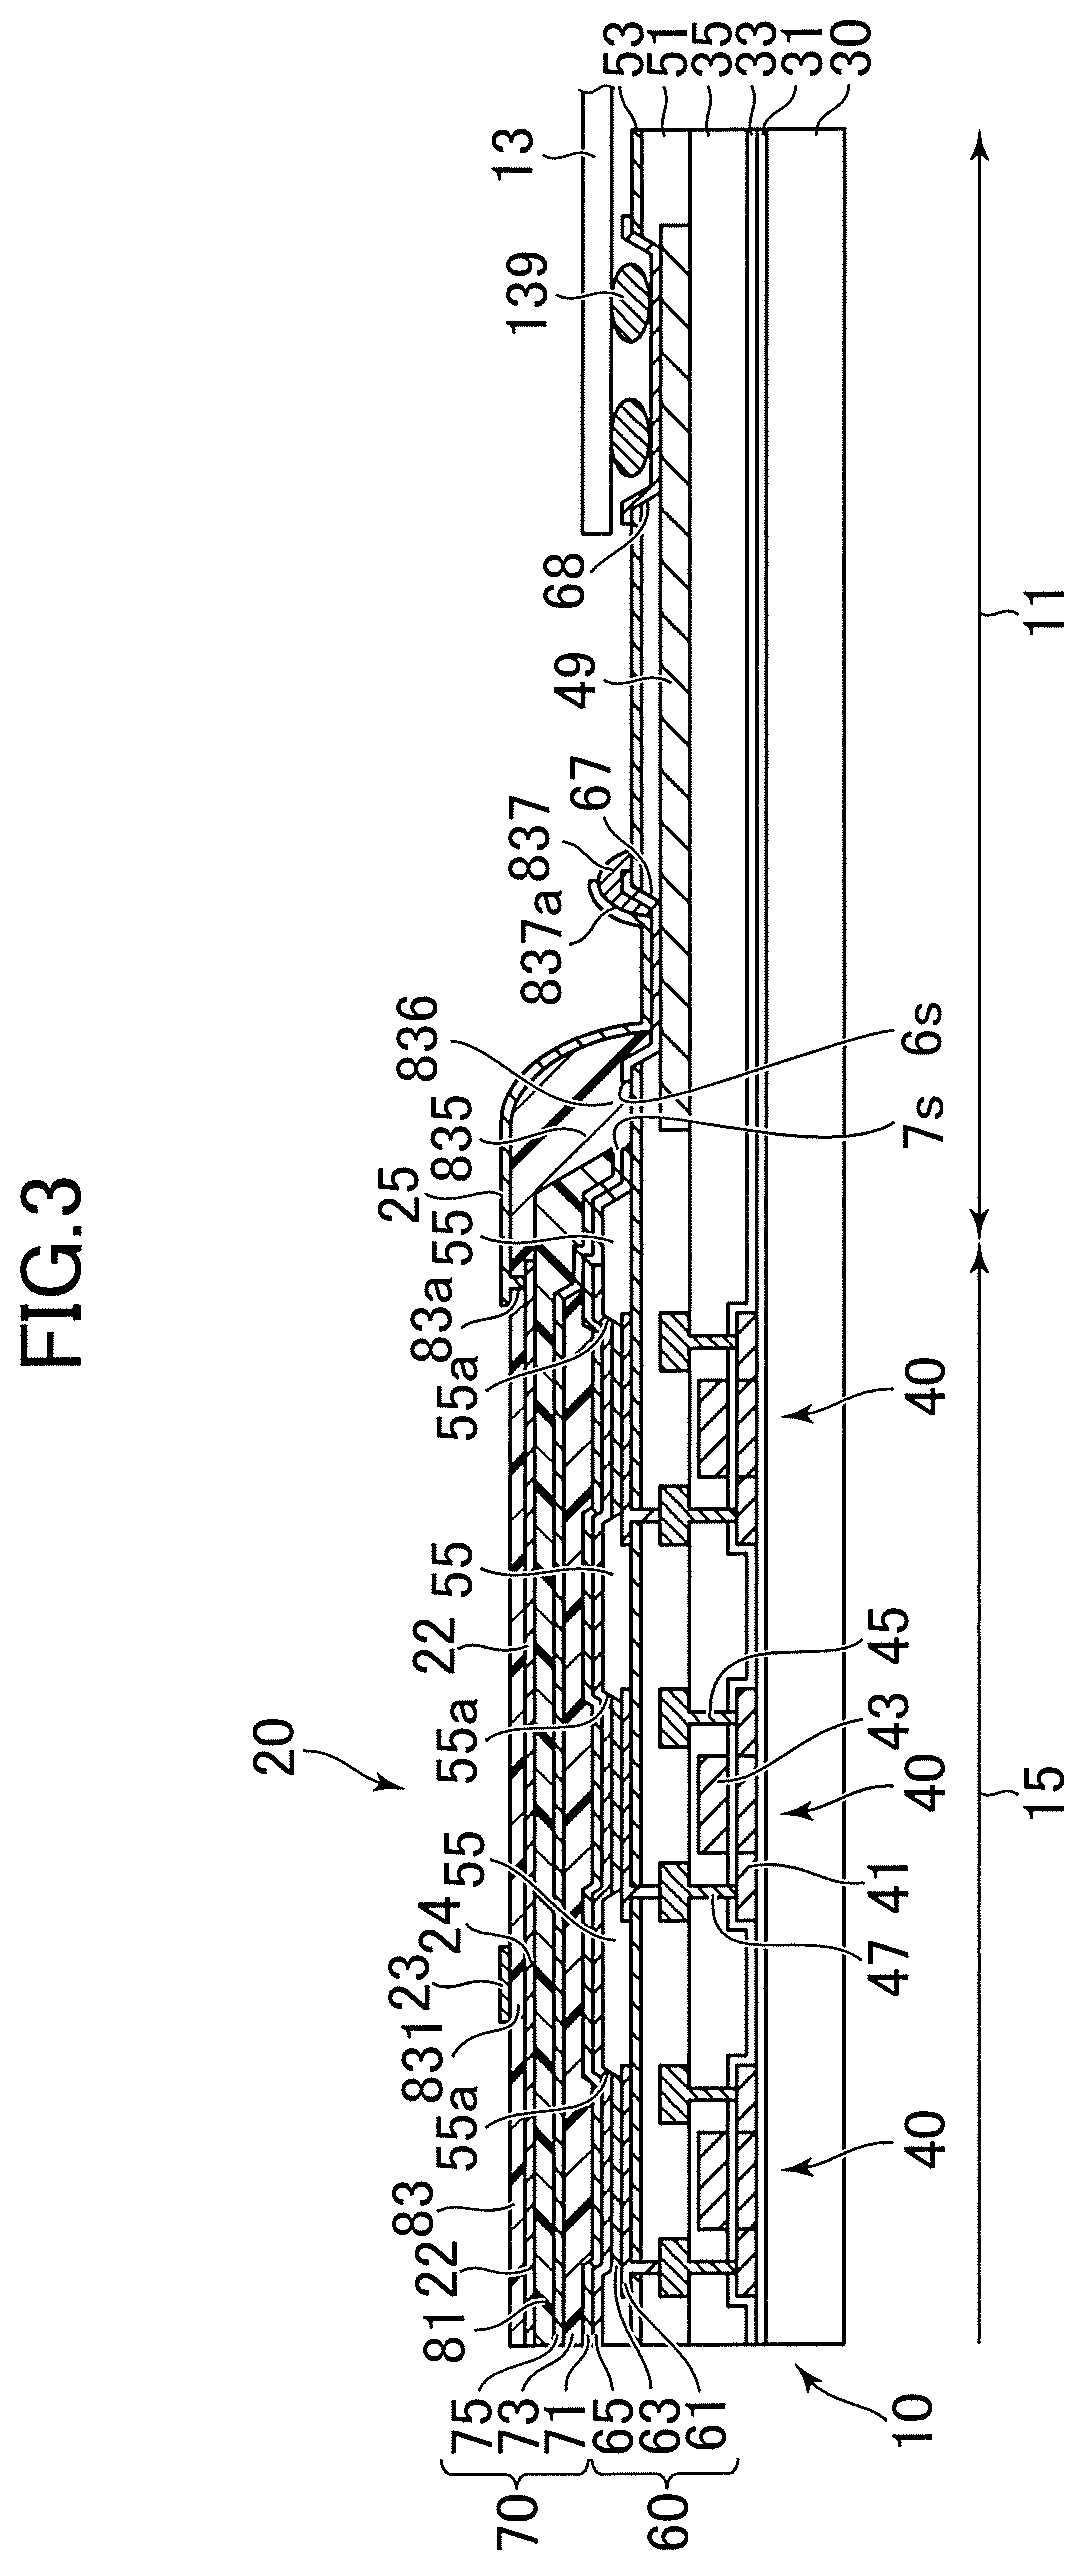 Display device with touch sensor